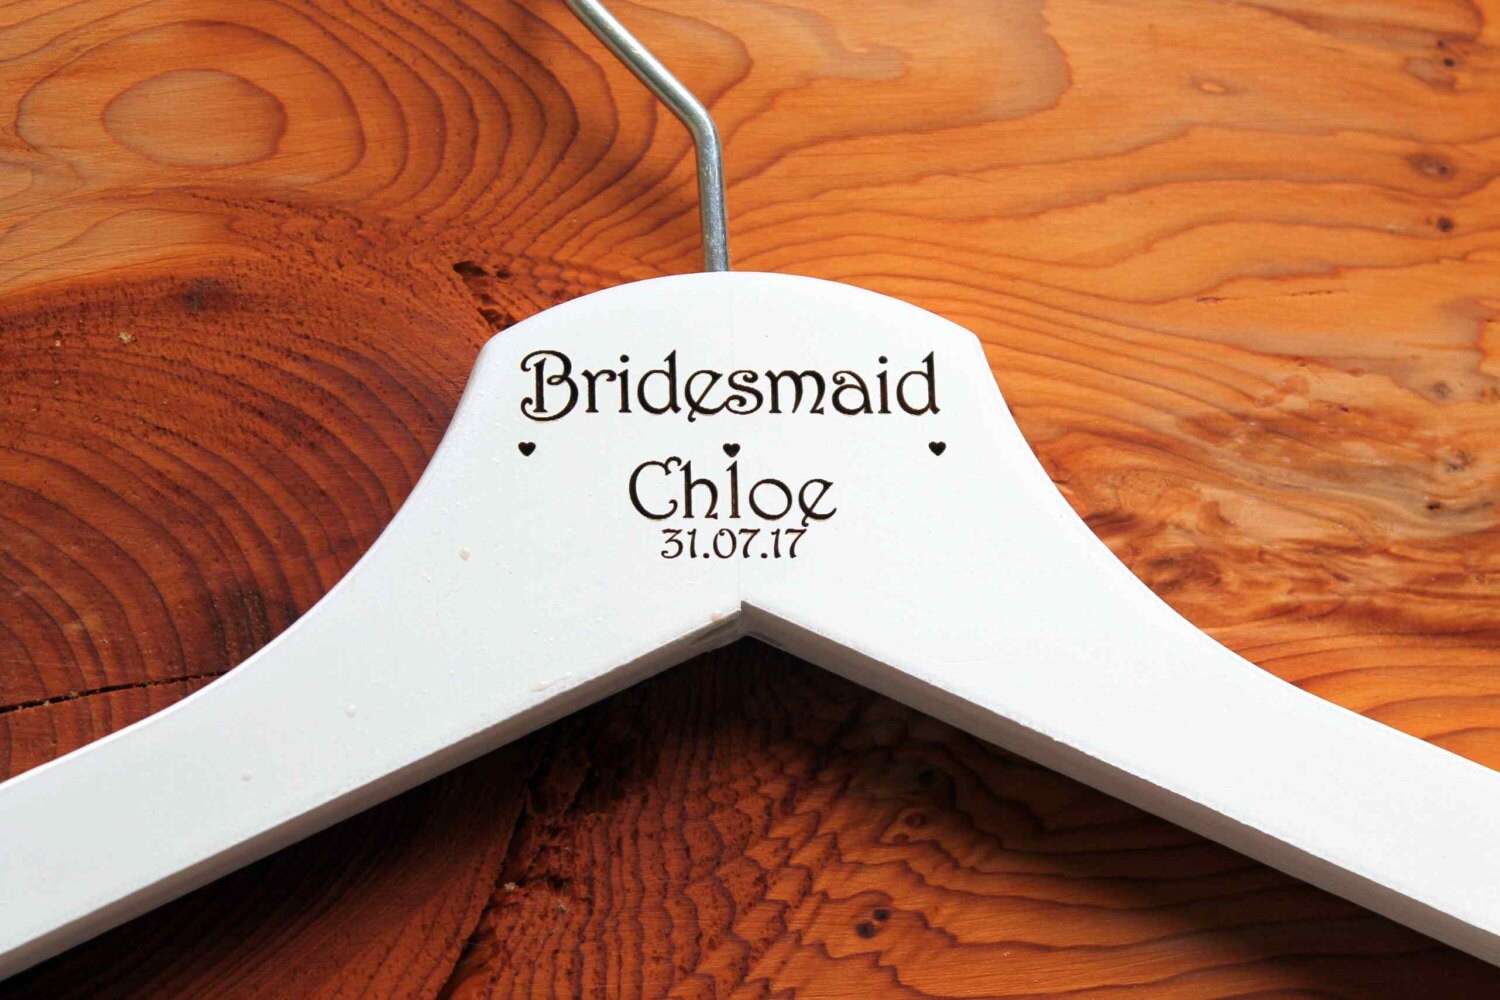 Personalised Bridal Wedding Hanger in Wood or White - Hanger Engraved Wedding Gift Bride, Bridesmaids and more.